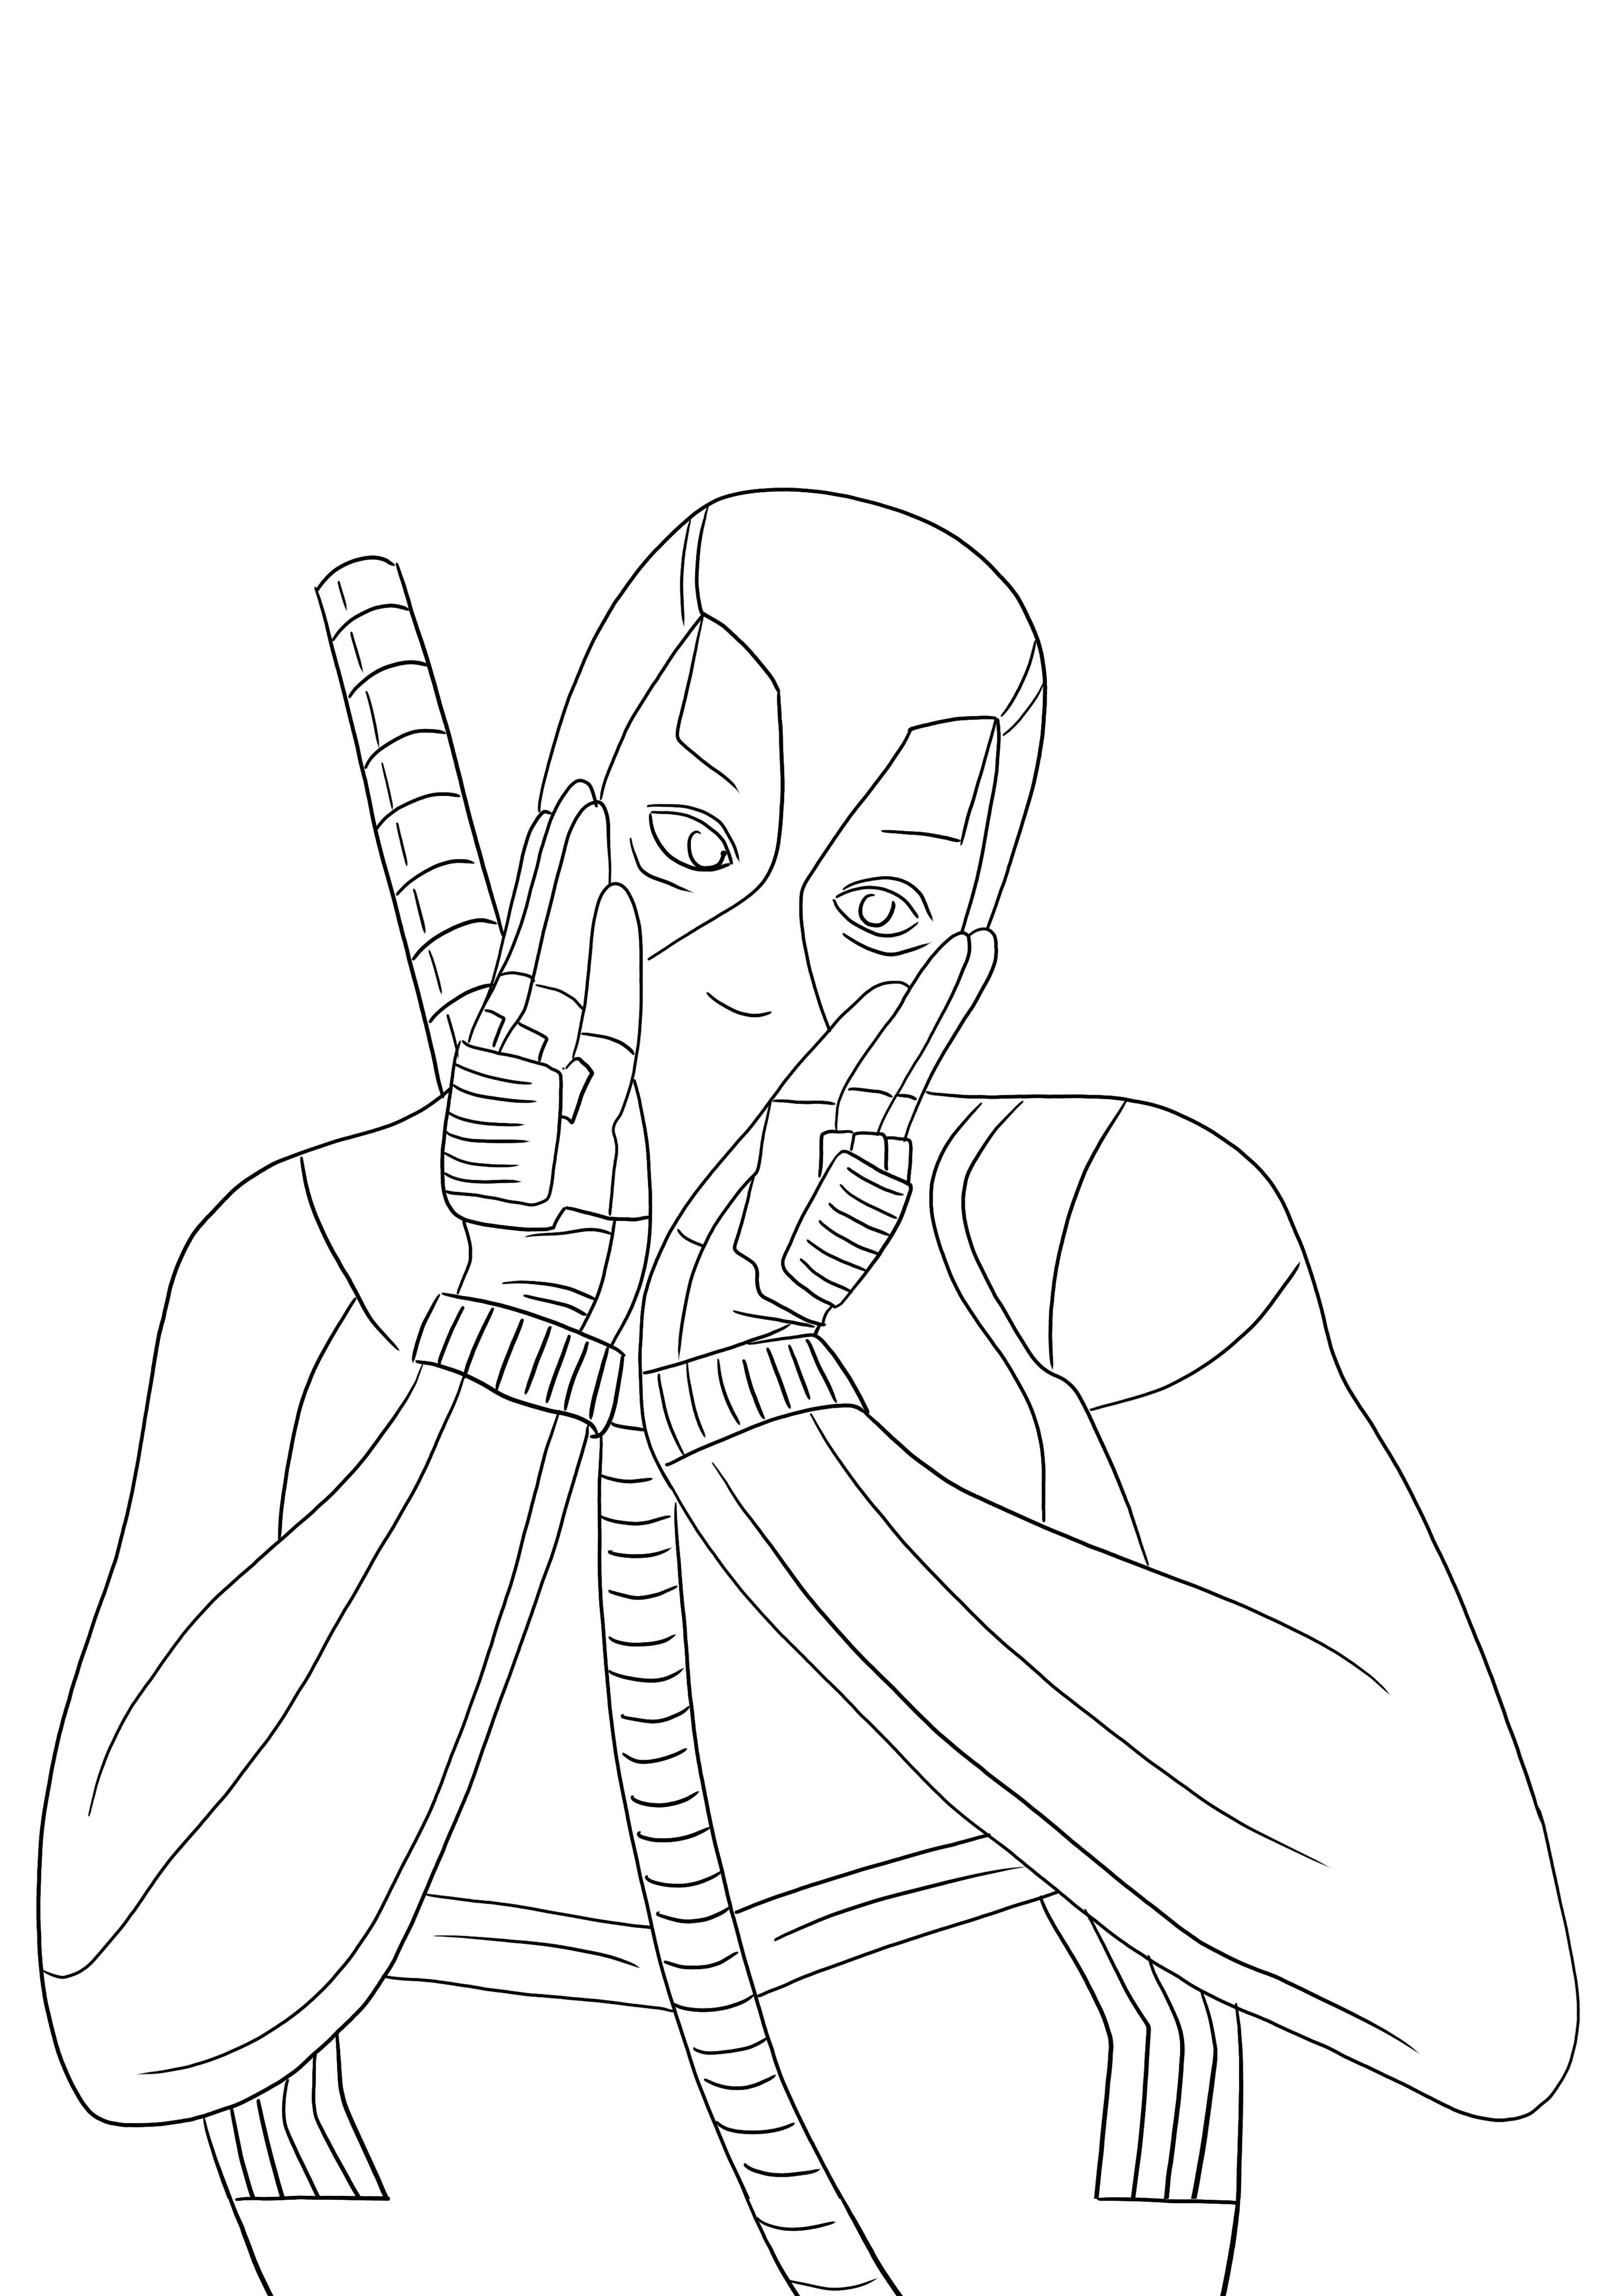 Lovely Deadpool from Marvel stories coloring sheet free to download or print